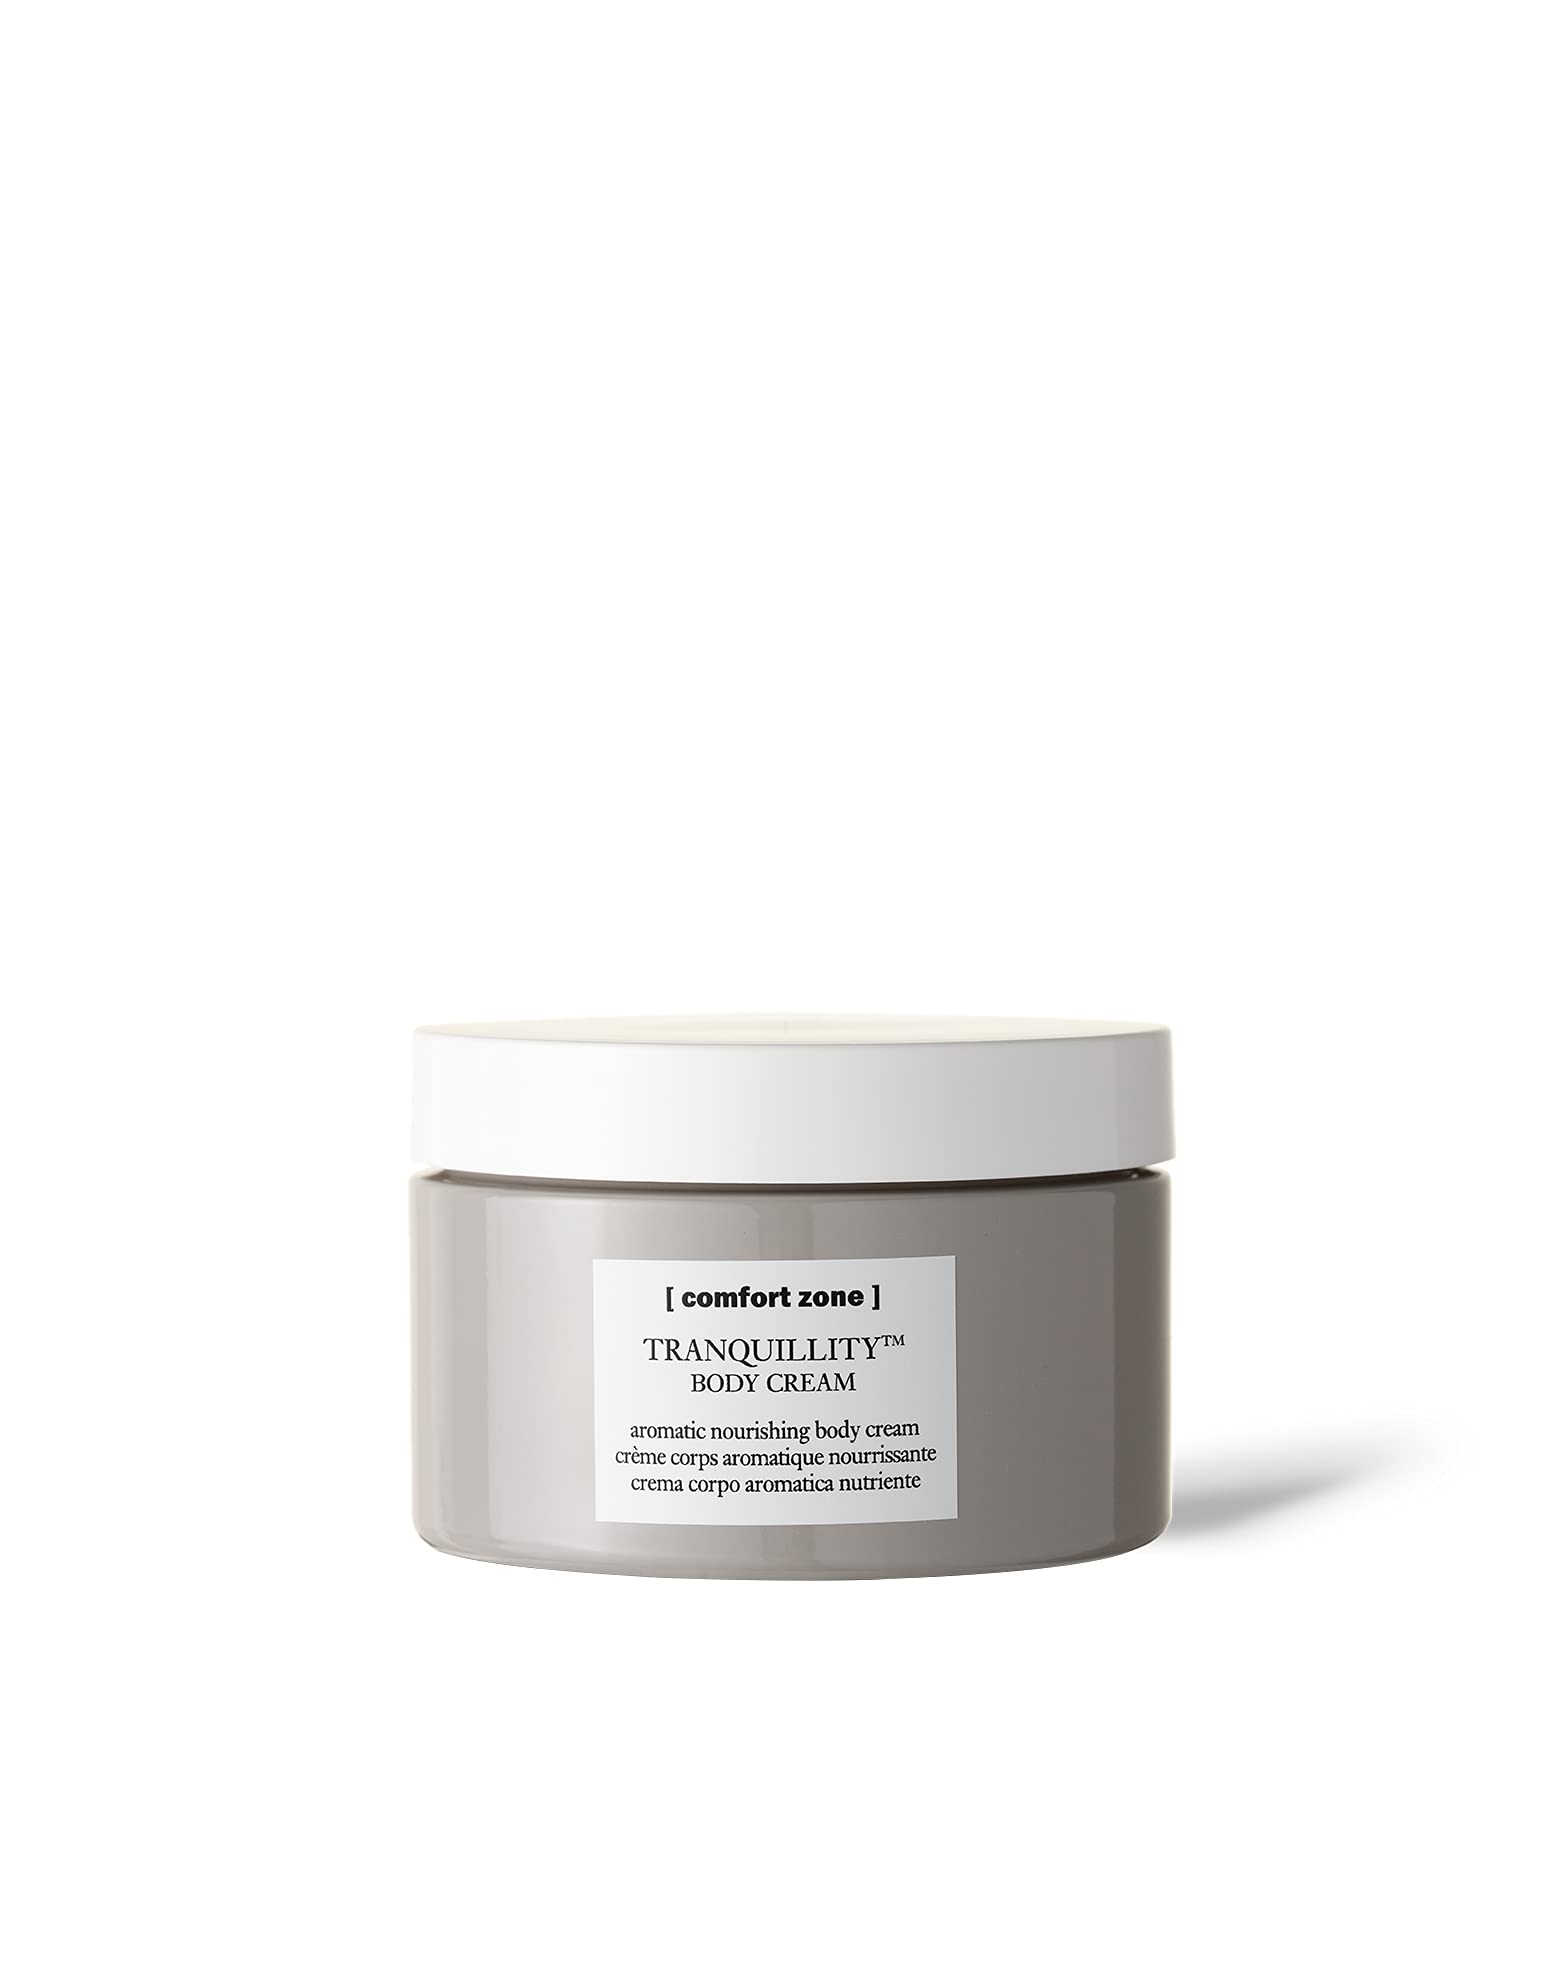 [ comfort zone ] Tranquillity Aromatic, Nourishing Body Cream, Warm And Woody With Light Notes of Vanilla and Citrus, 6.27 Oz.